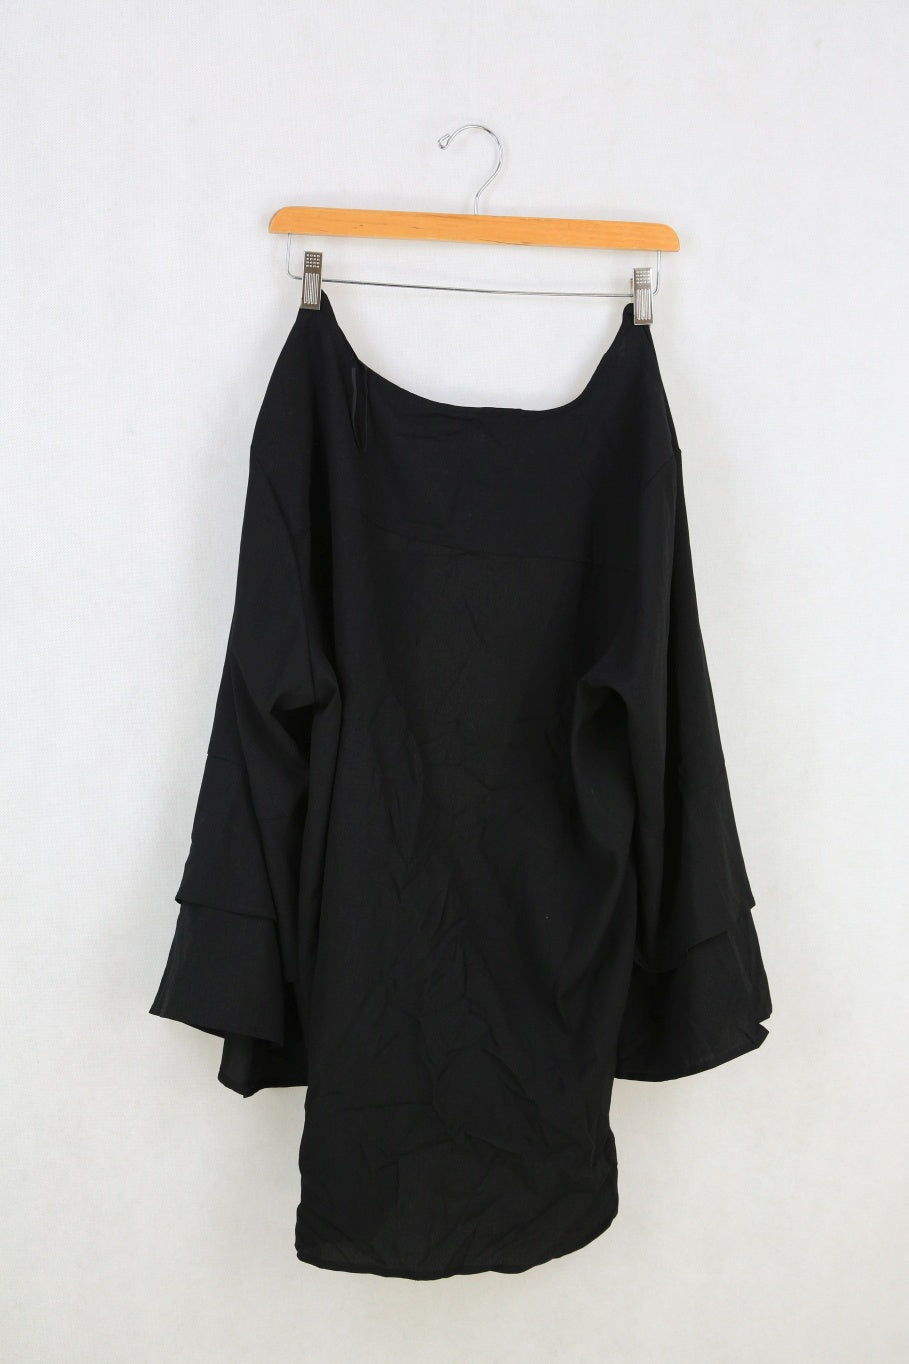 Wite+ Black Crossover Blouse 20